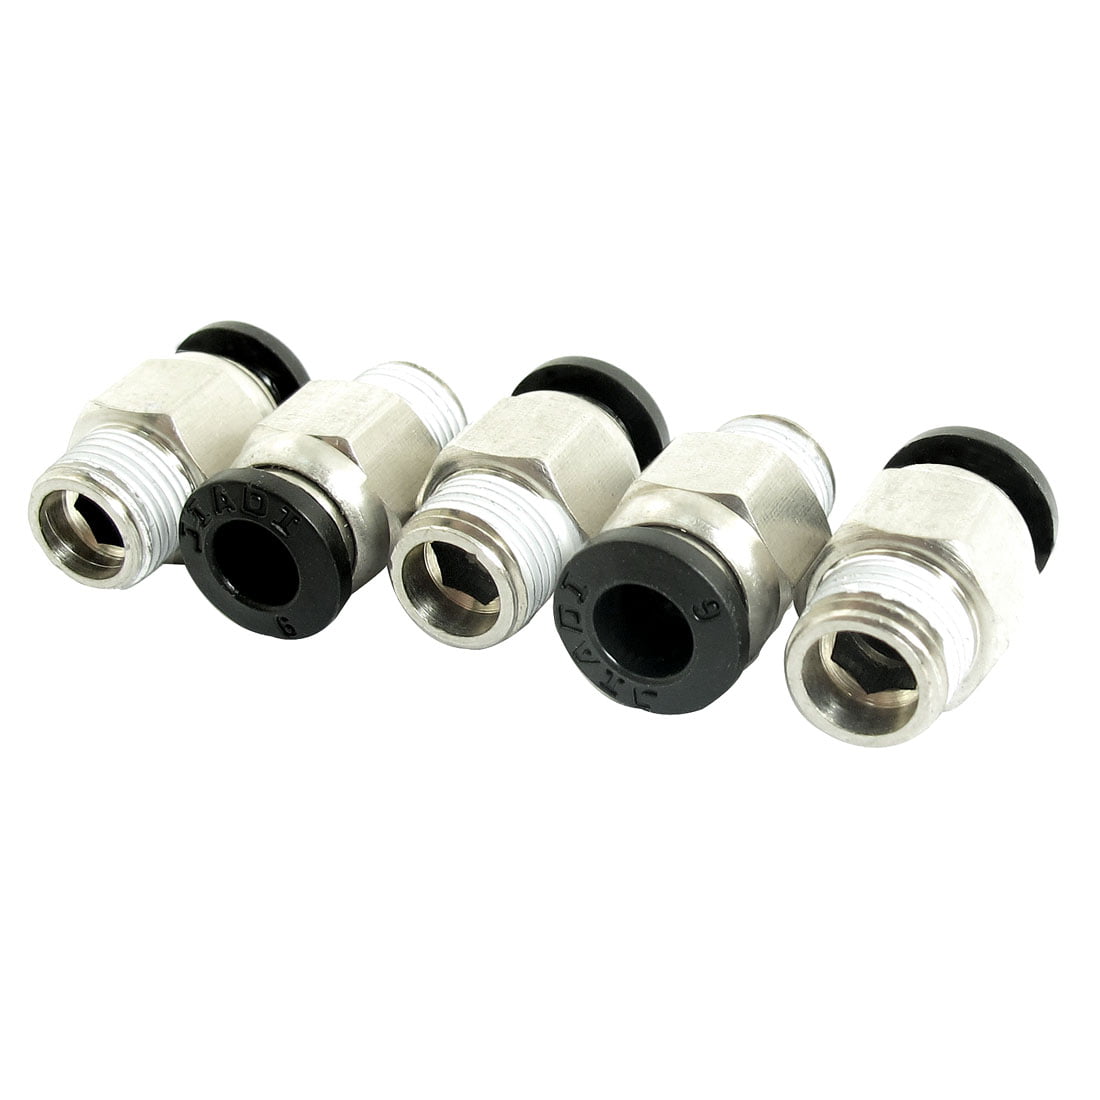 5pcs PY-6 Y Connector 6mm to 6mm Air Pneumatic Push In Y Fitting New 